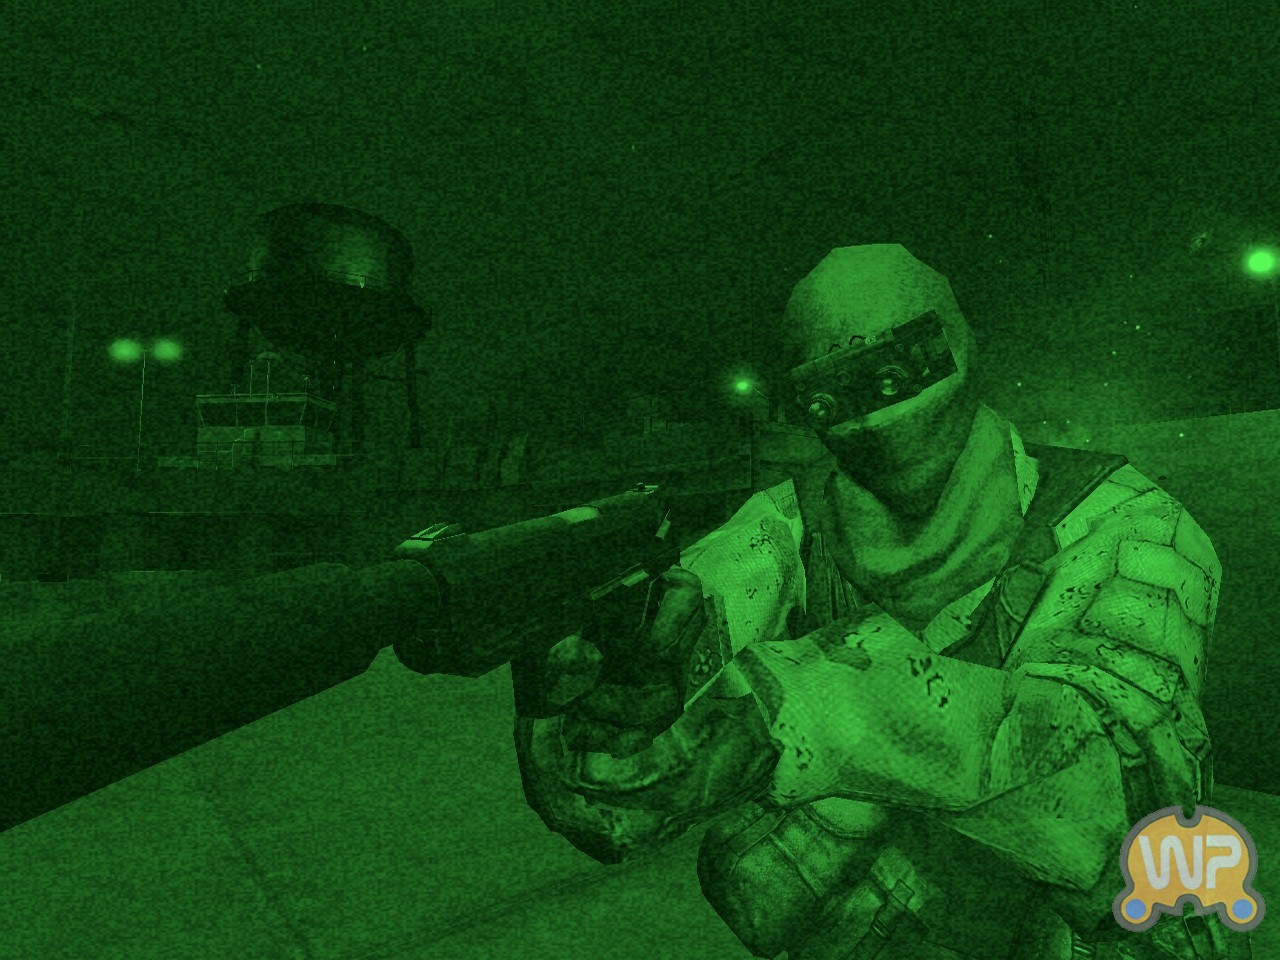 Special 2 game. Bf2 Special Forces. Battlefield 2 Special Forces. Battlefield 2 Special Forces SAS. Бф2 СПЕКИАЛ Форс.